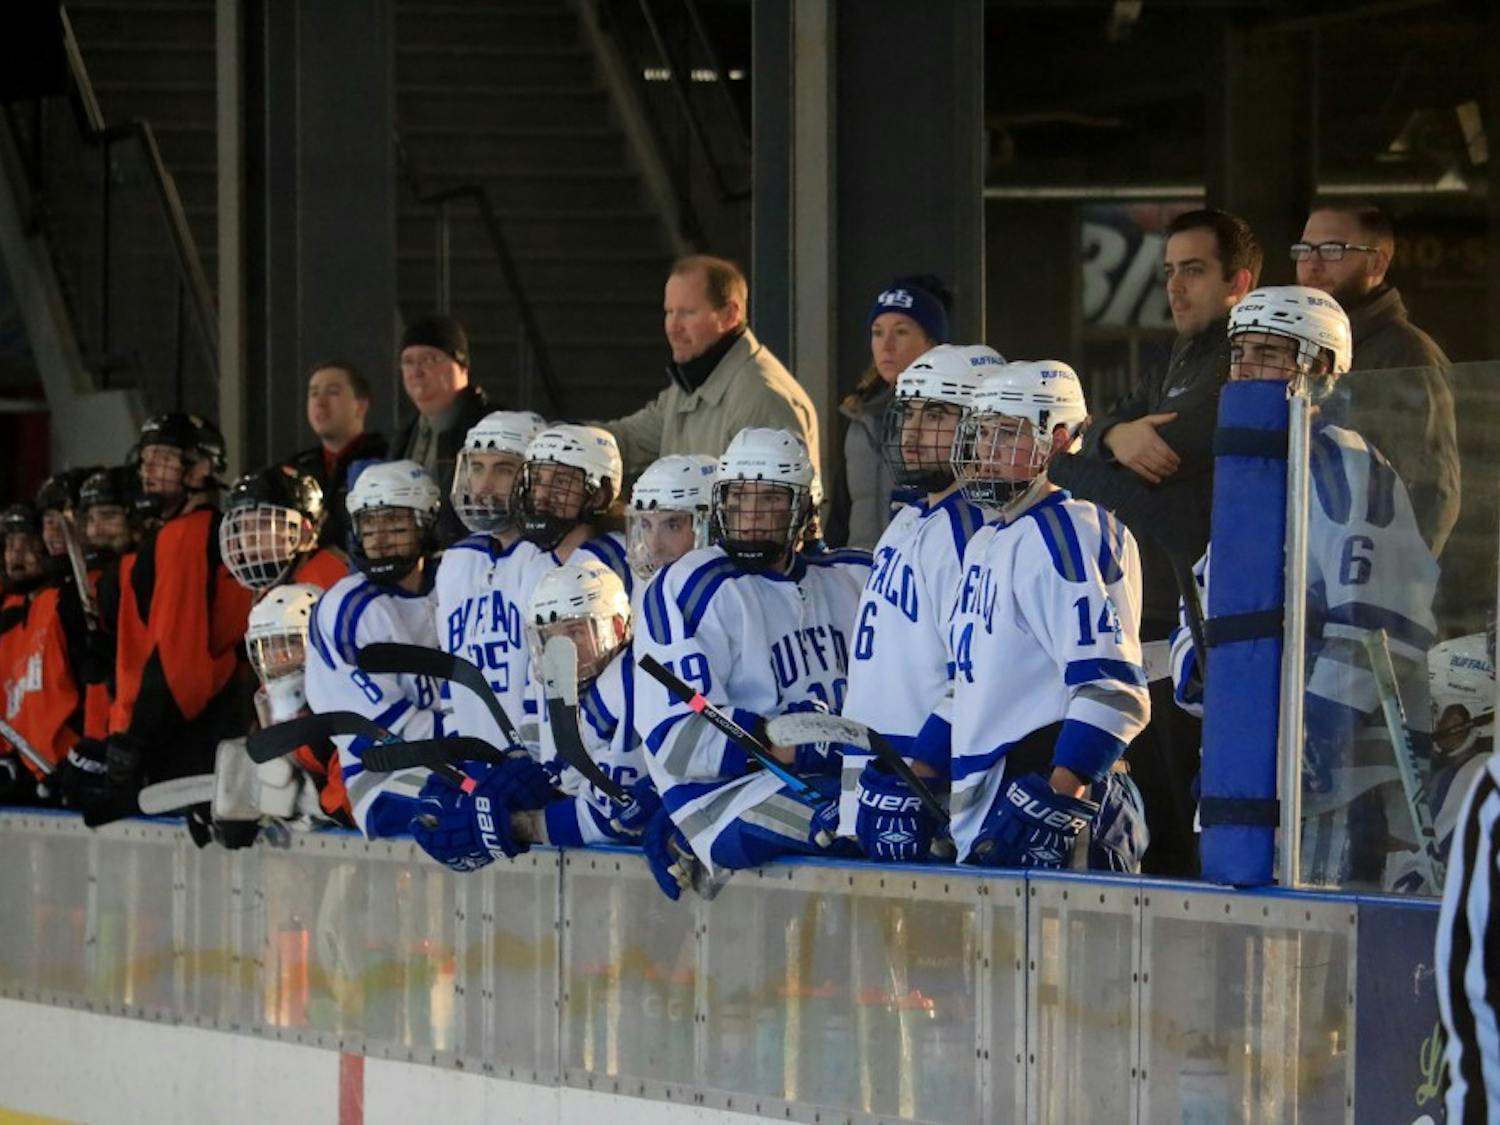 The club hockey team rest on the bench during a game. the team deals with multiple challenges being a club sport.